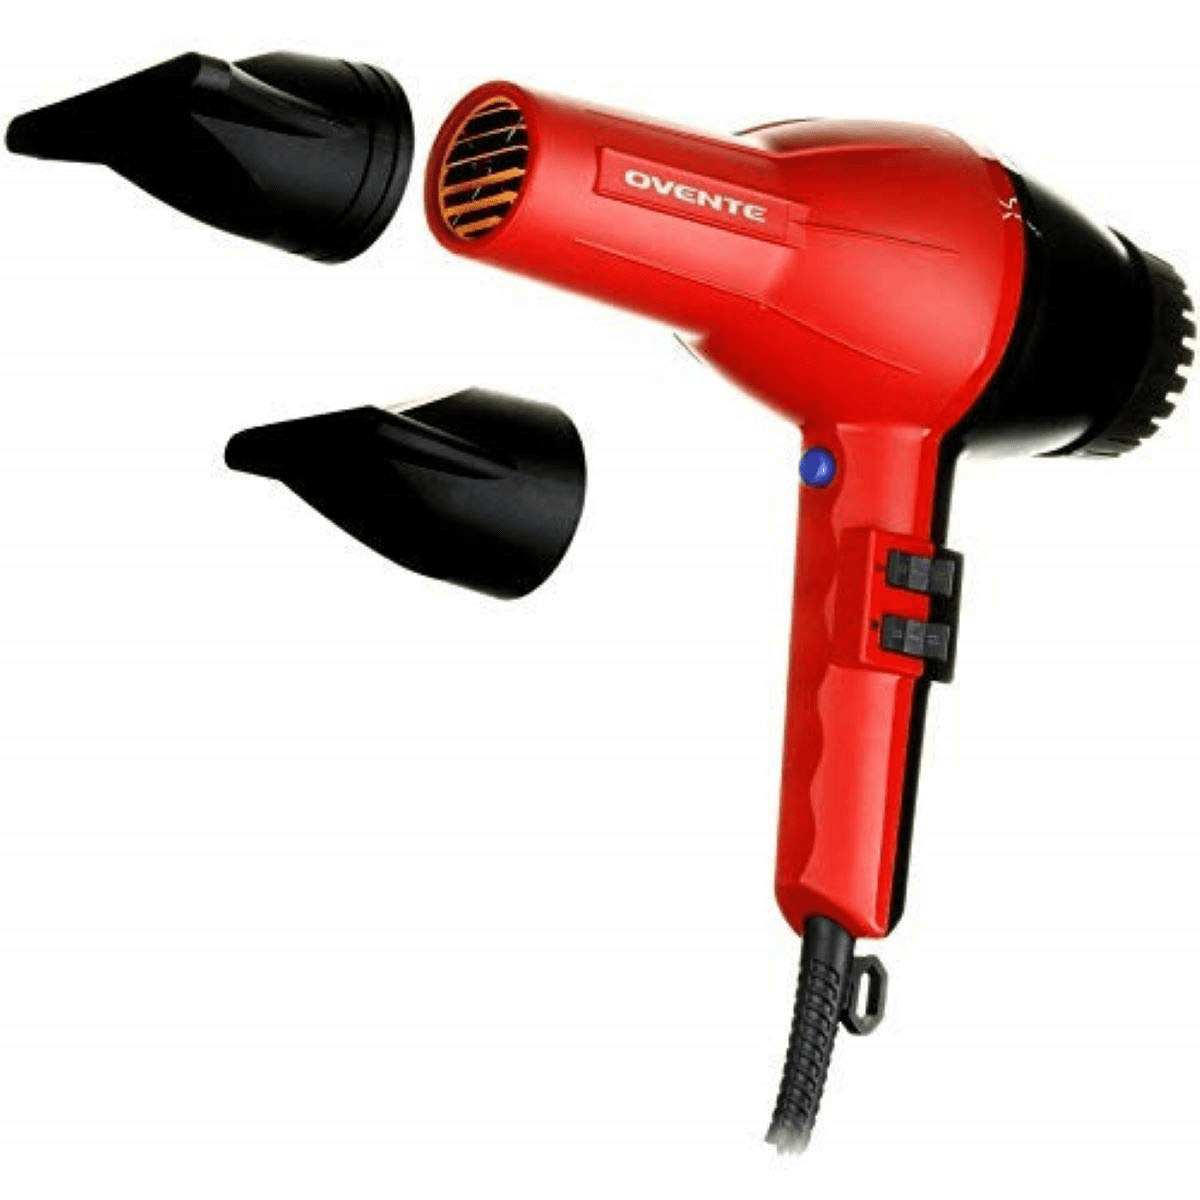 for Ideal Volume Concentrator 2 Watt Travel, Tourmaline Comes Black Hair Dryer, & & Technology, Lightweight & Home Nozzle for Attachments, w/ Professional Body, Ionic & Red 3600 Ovente 2200 Smoothing,